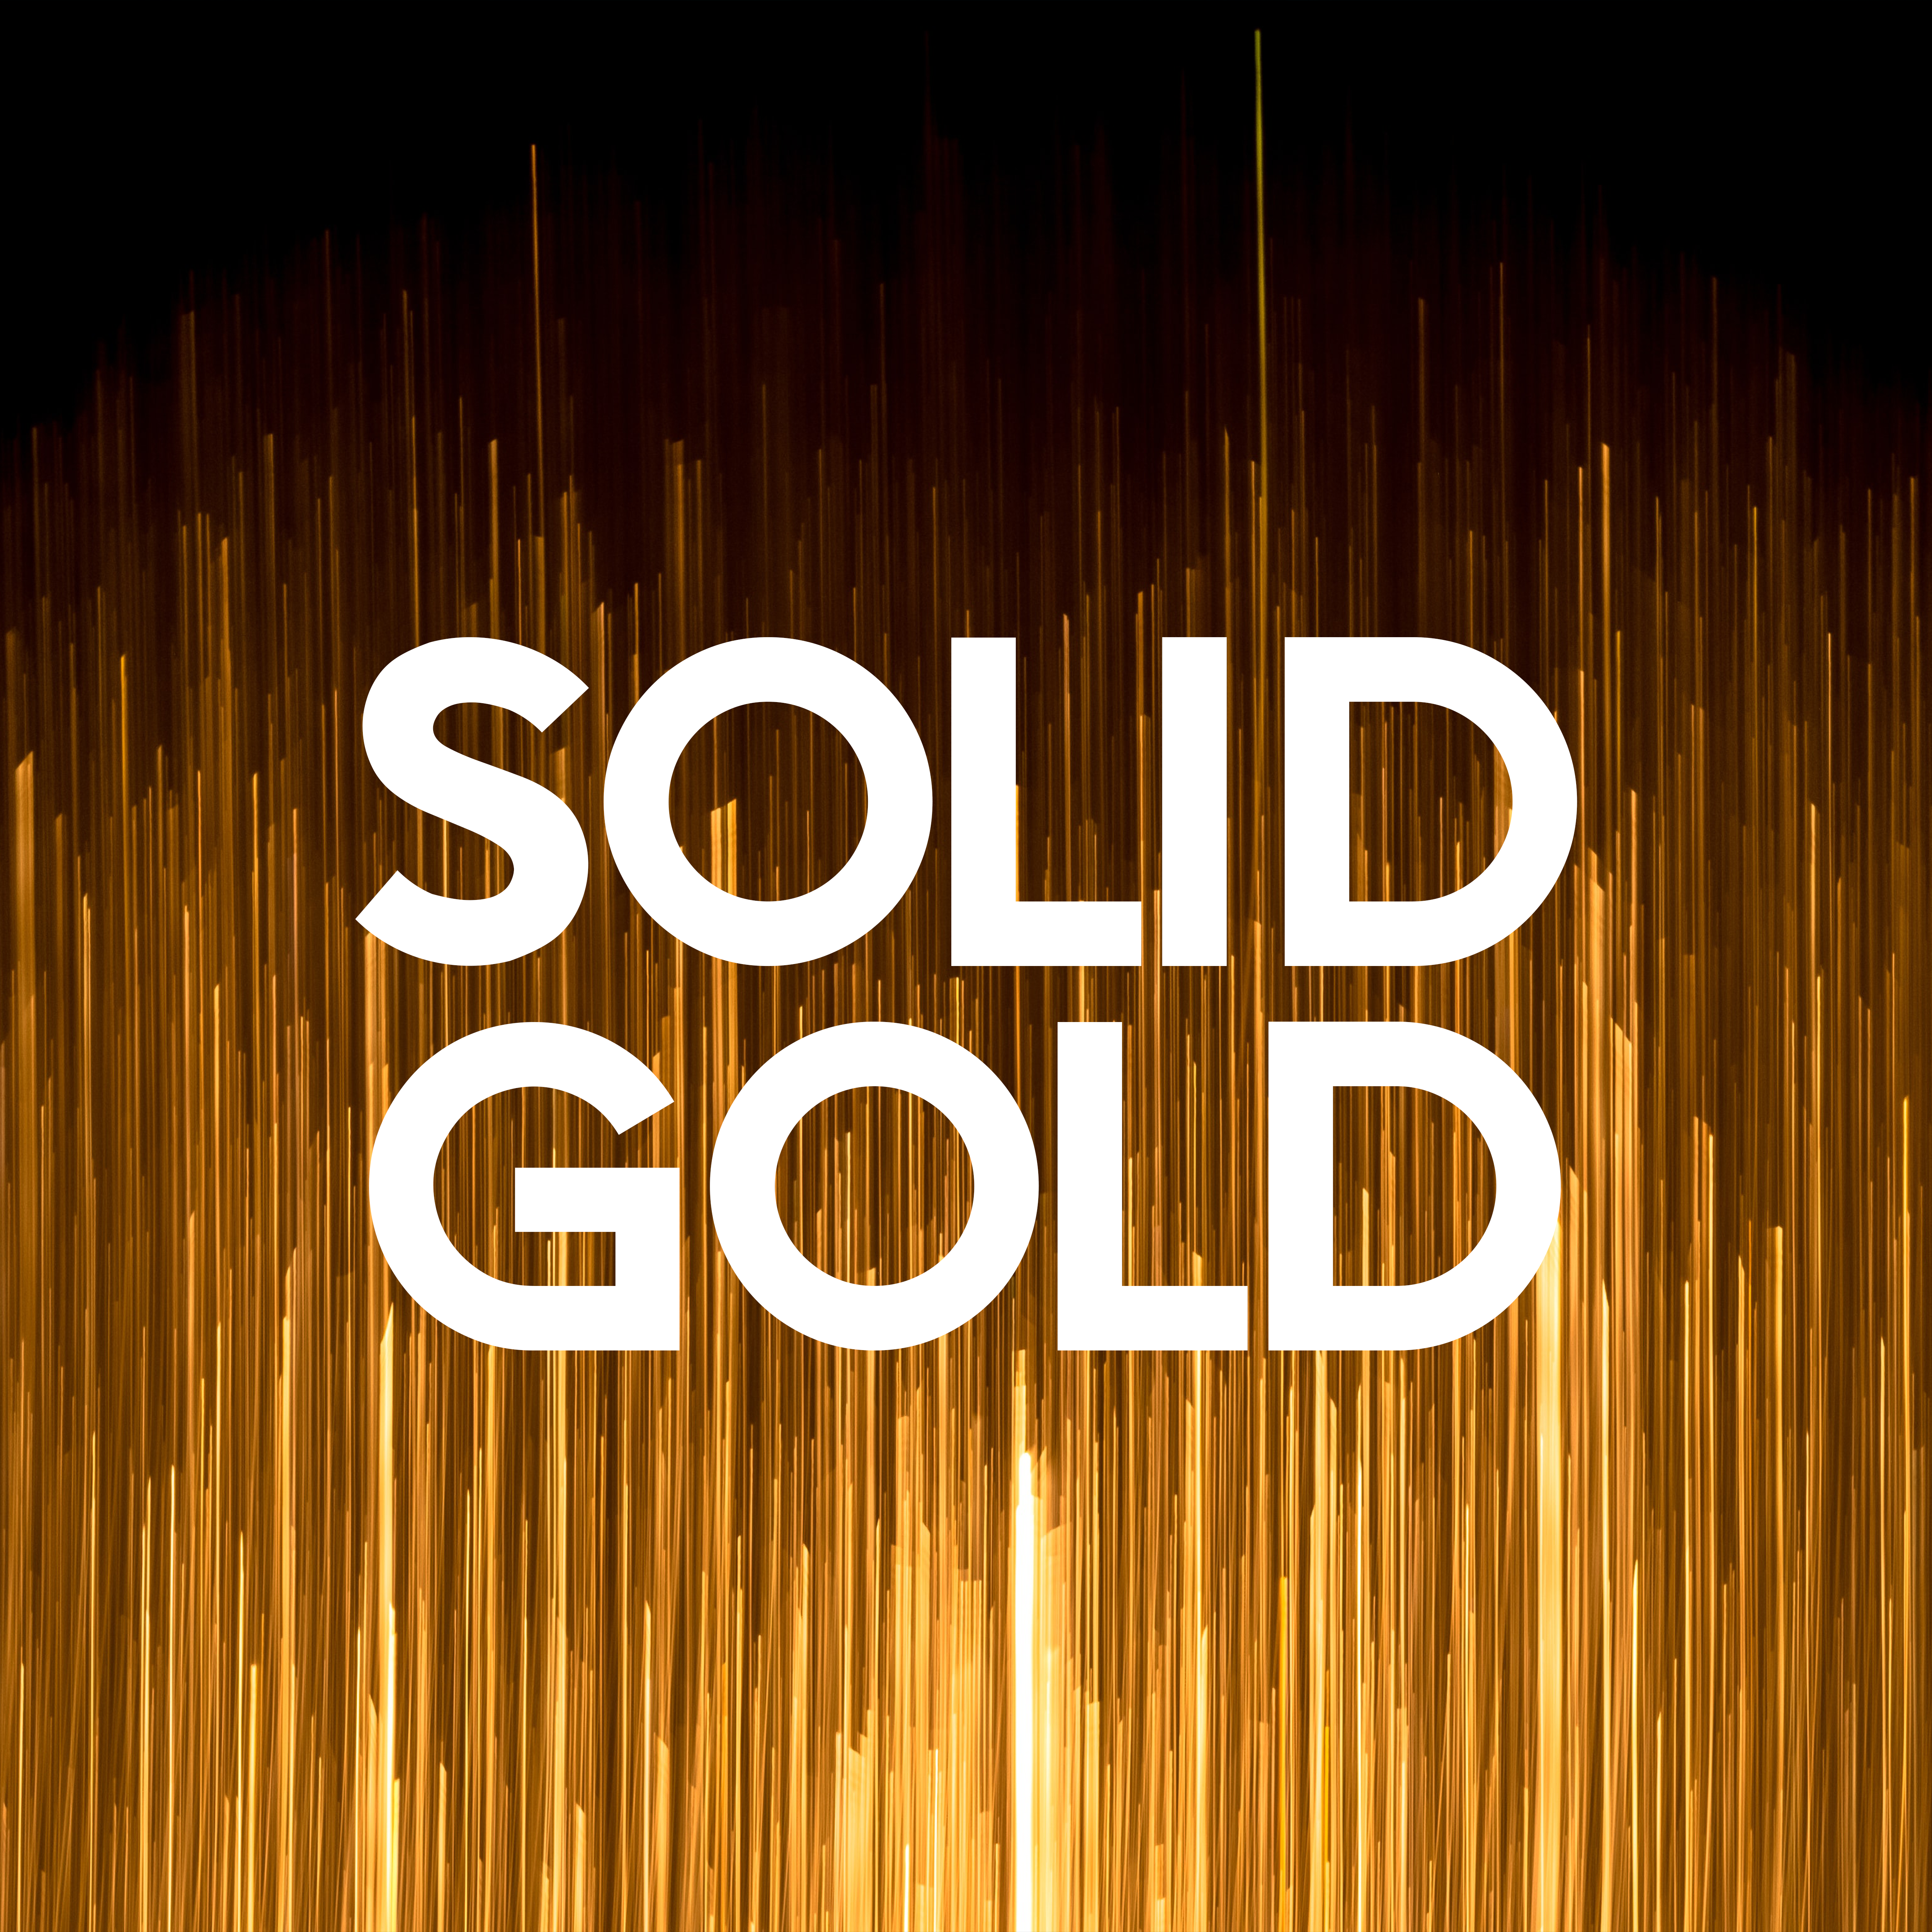 Solid gold - Frederic KOSTER